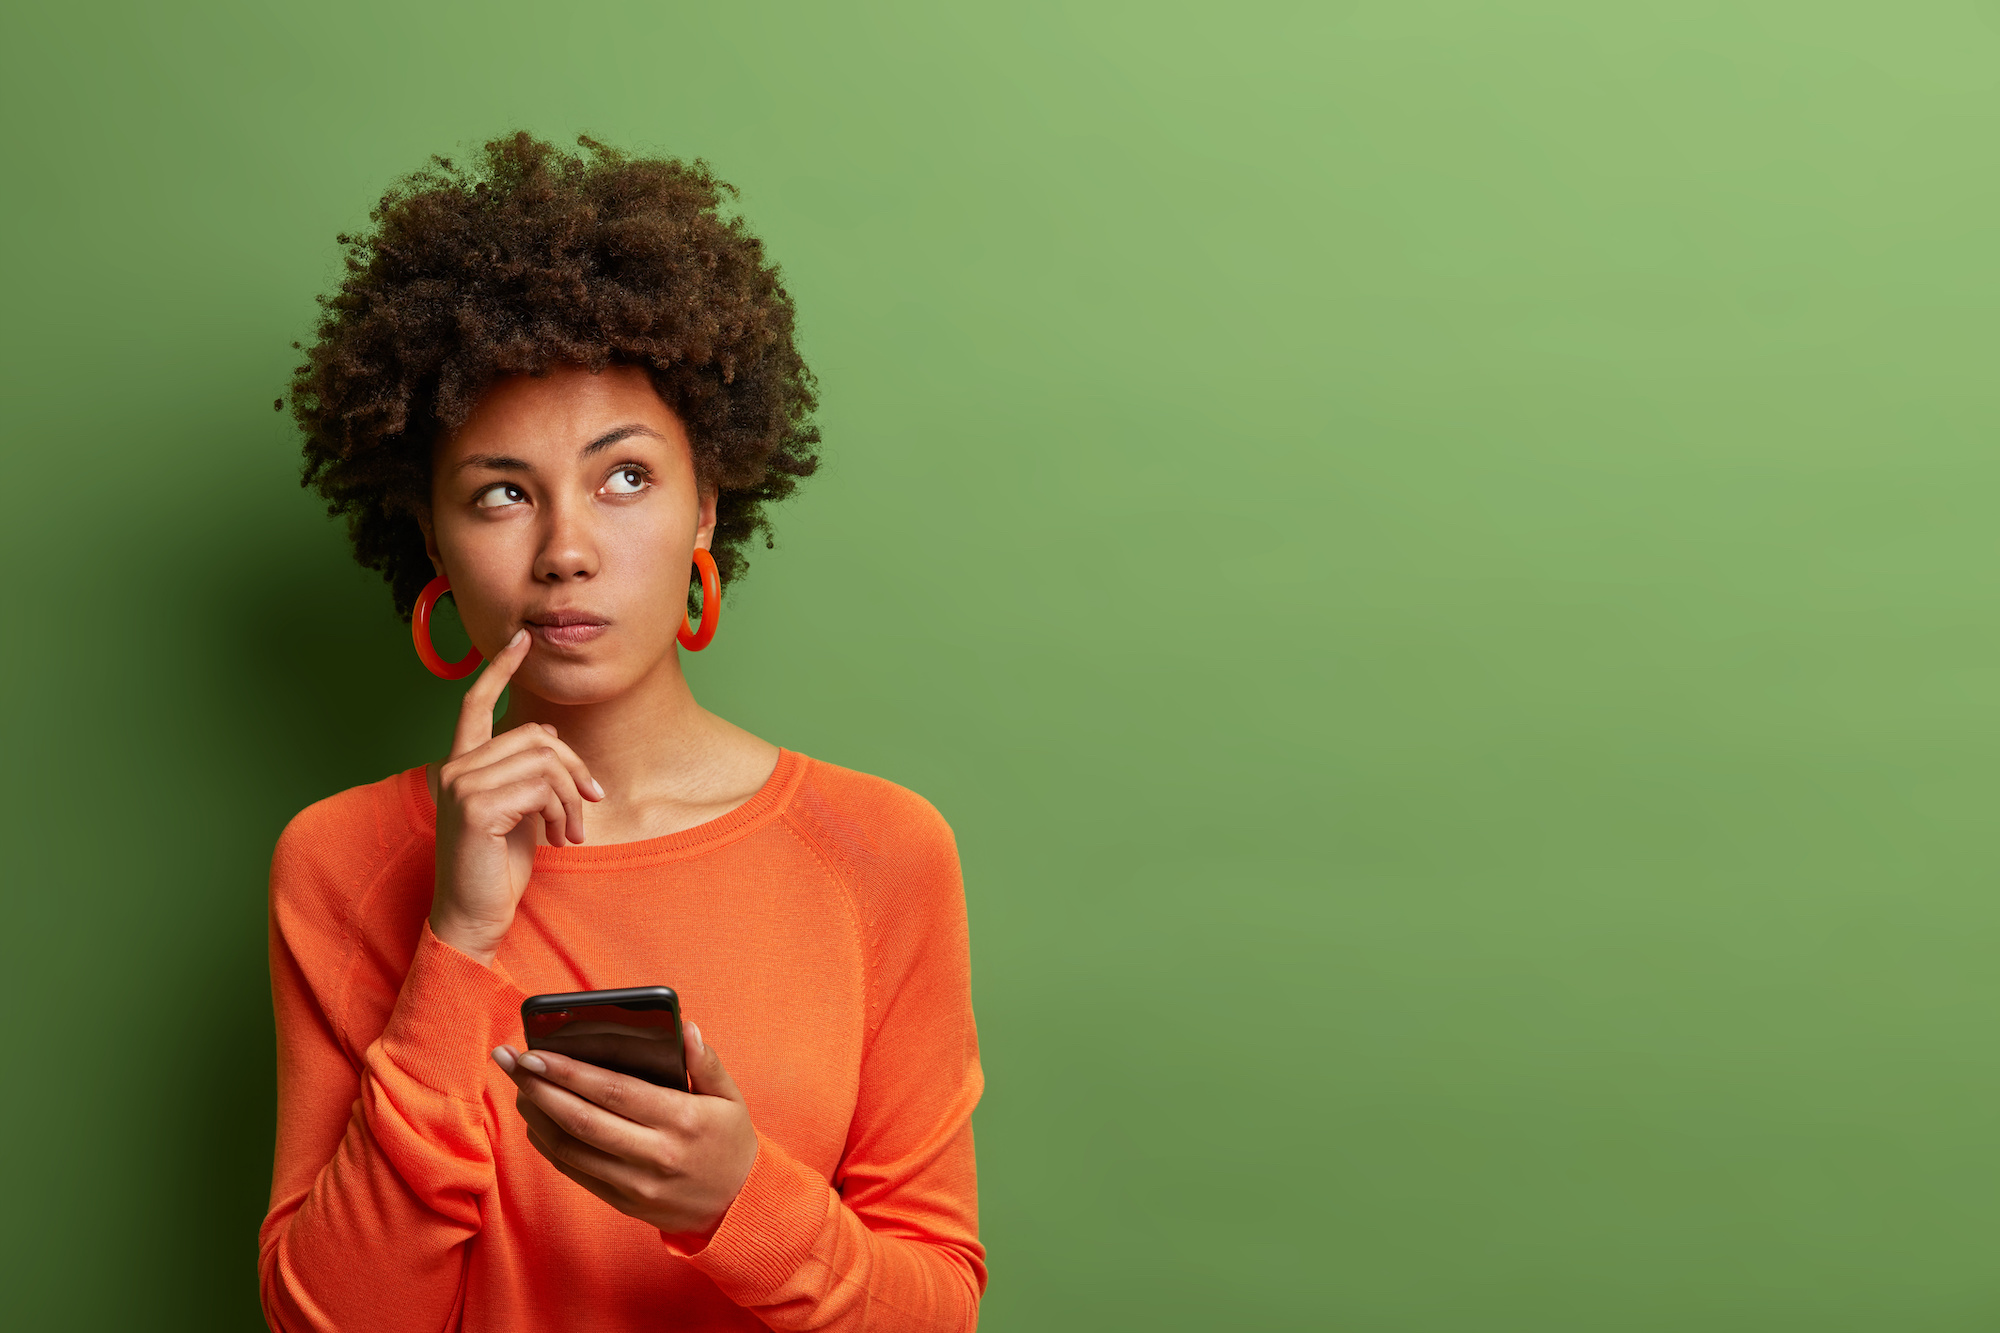 woman holding phone and thinking